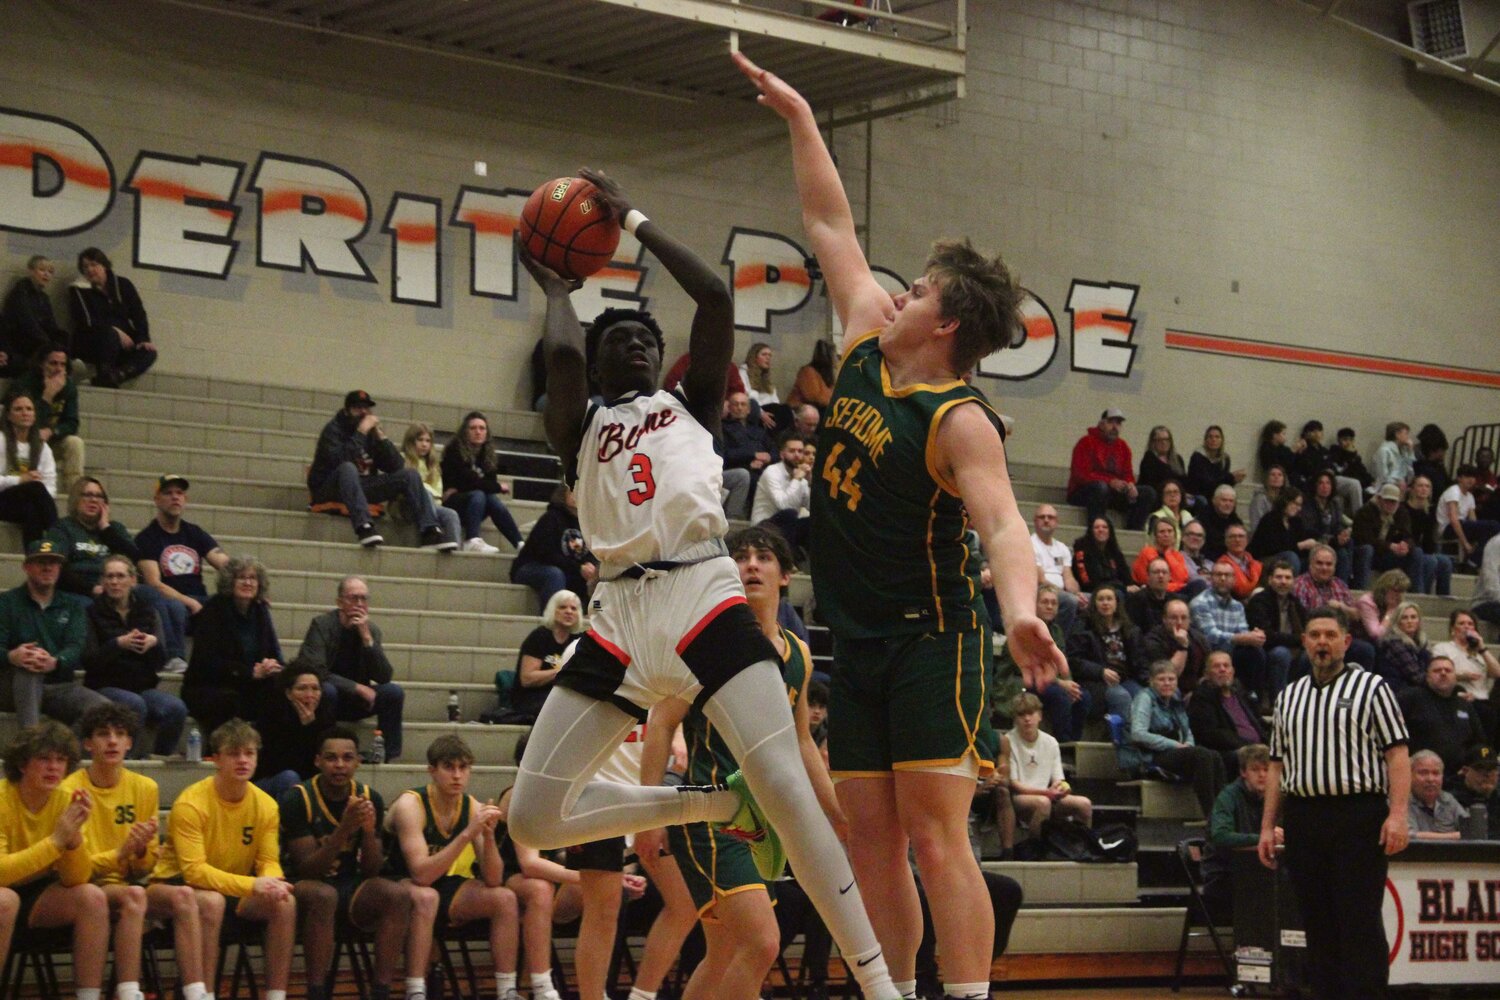 Blaine junior forward Abdul-Fattah Kanagie pulls up for a jump shot against Sehome on January 30. The Borderites honored six departing seniors, and will play one more home game against Mount Baker in the Northwest Conference 1A District playoffs on Monday, February 5.